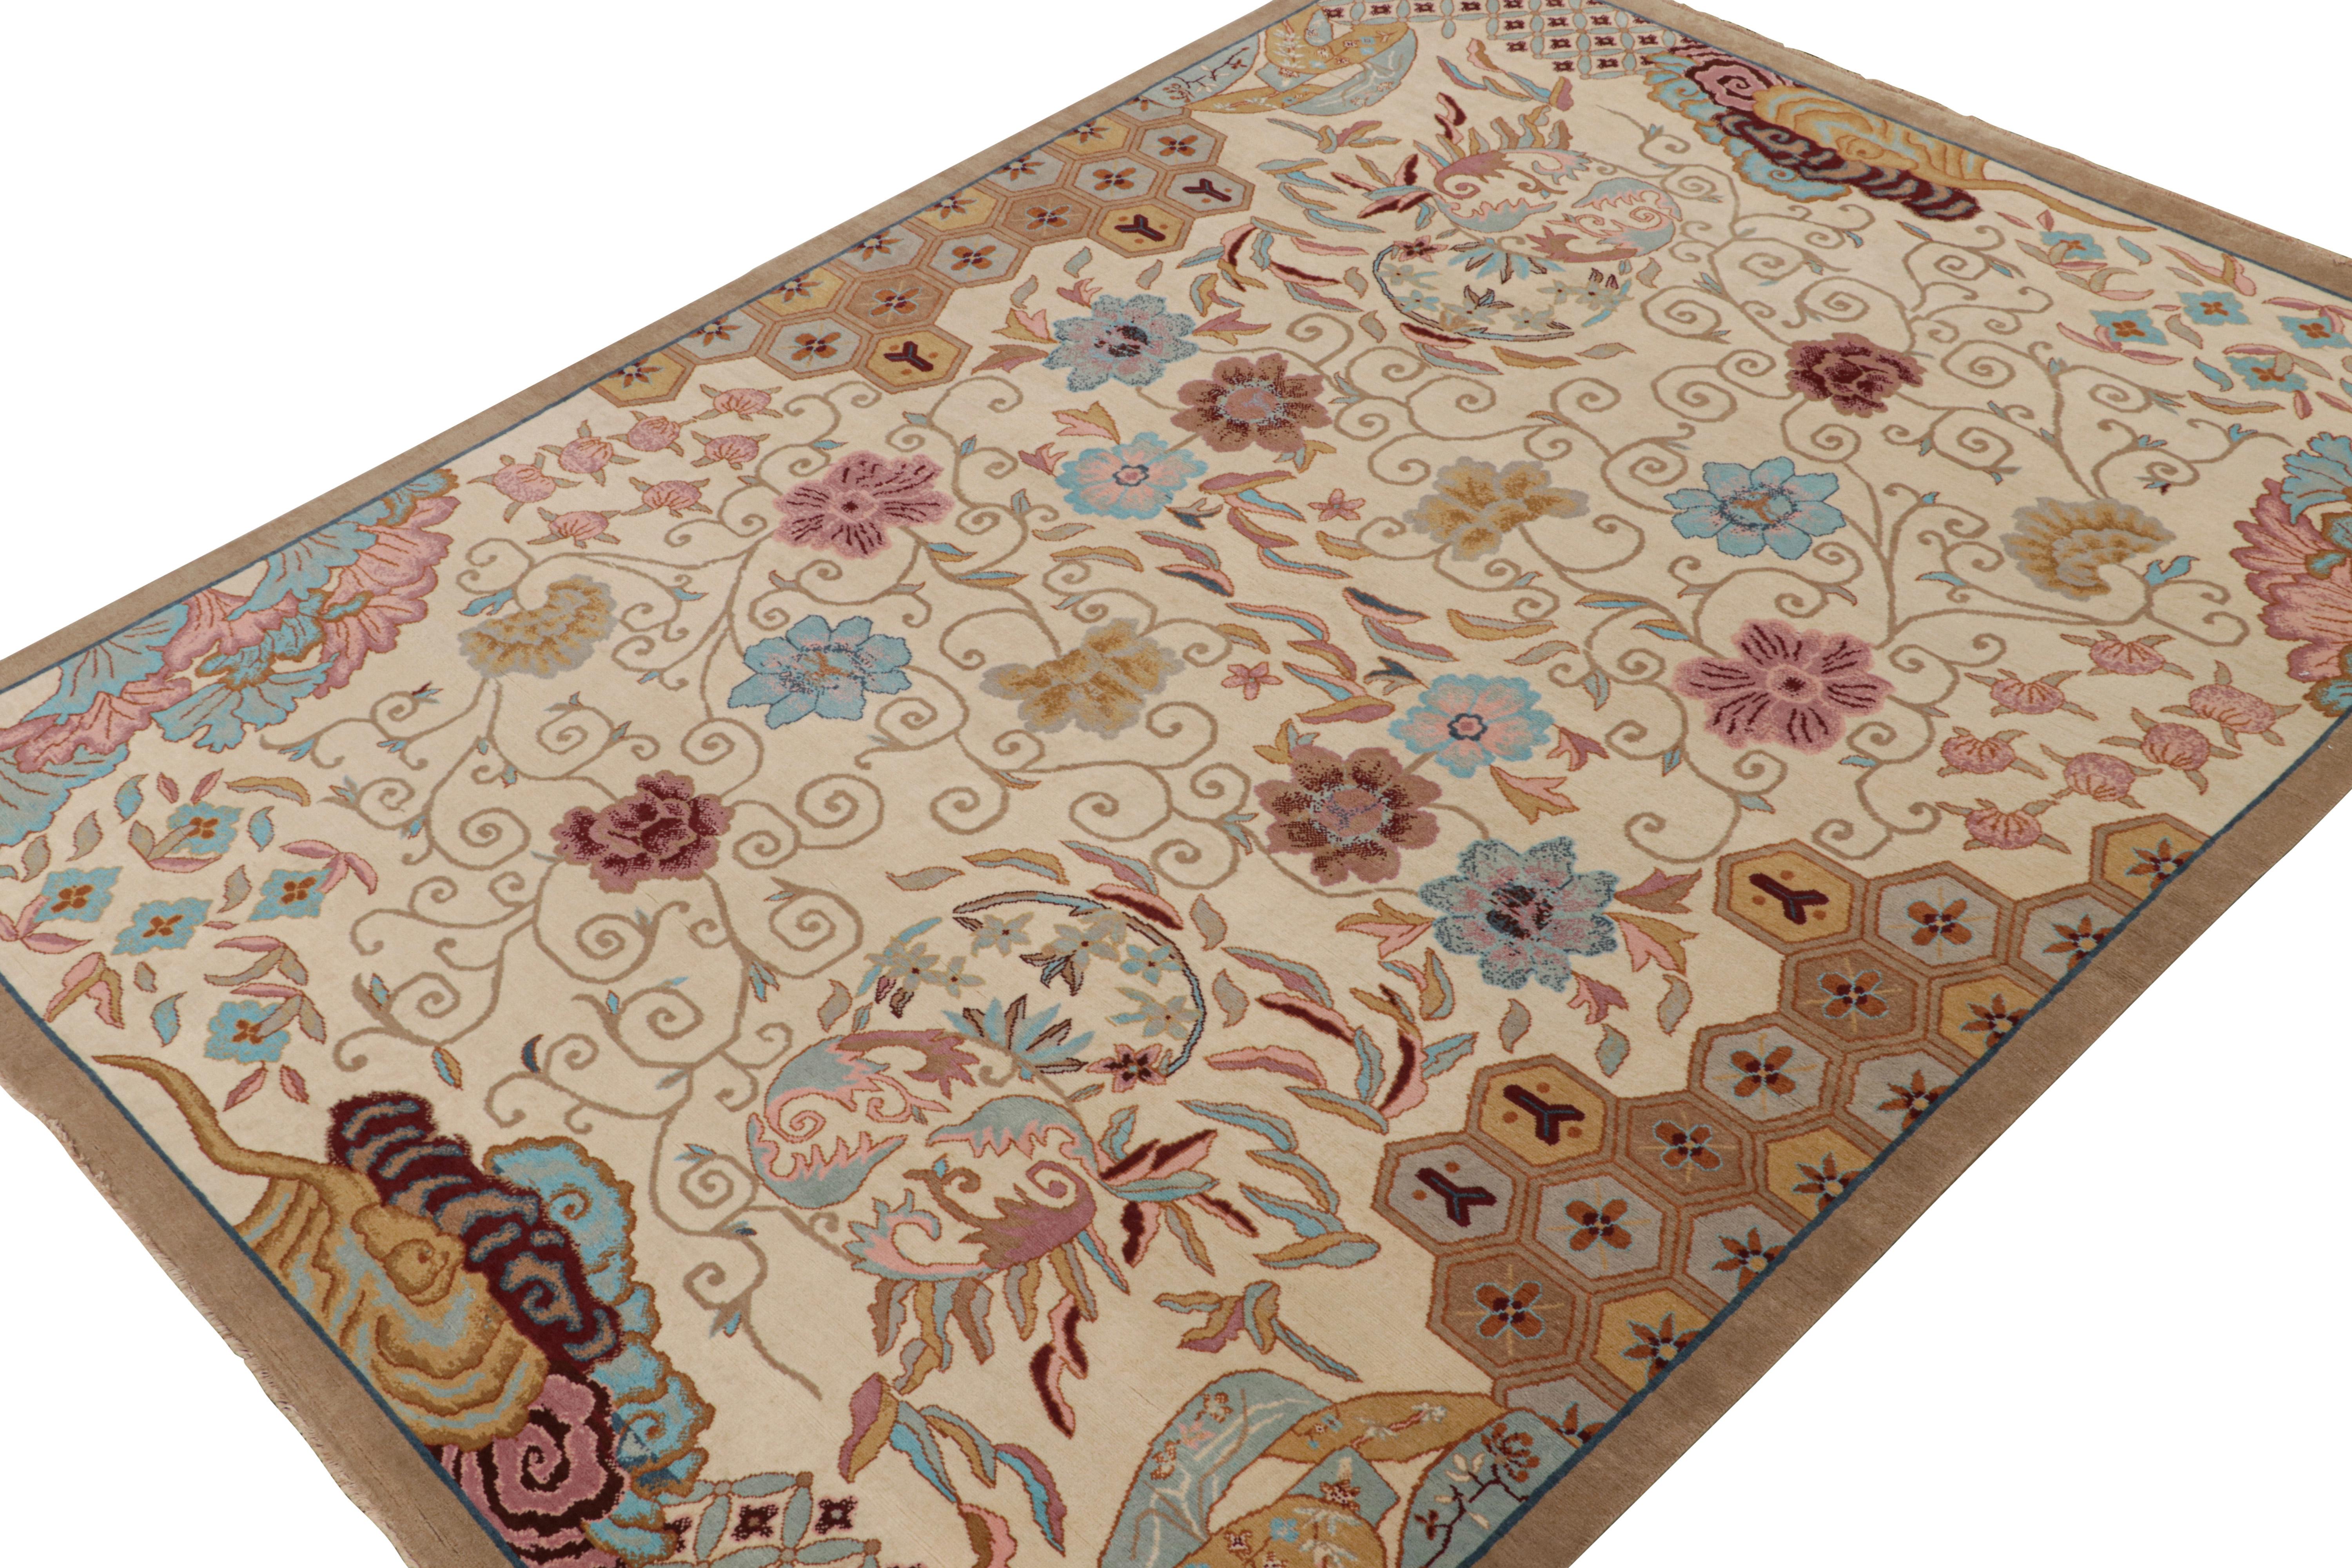 Hand-Knotted Rug & Kilim’s Chinese Art Deco Style Rug in Beige-Brown with Floral Patterns For Sale